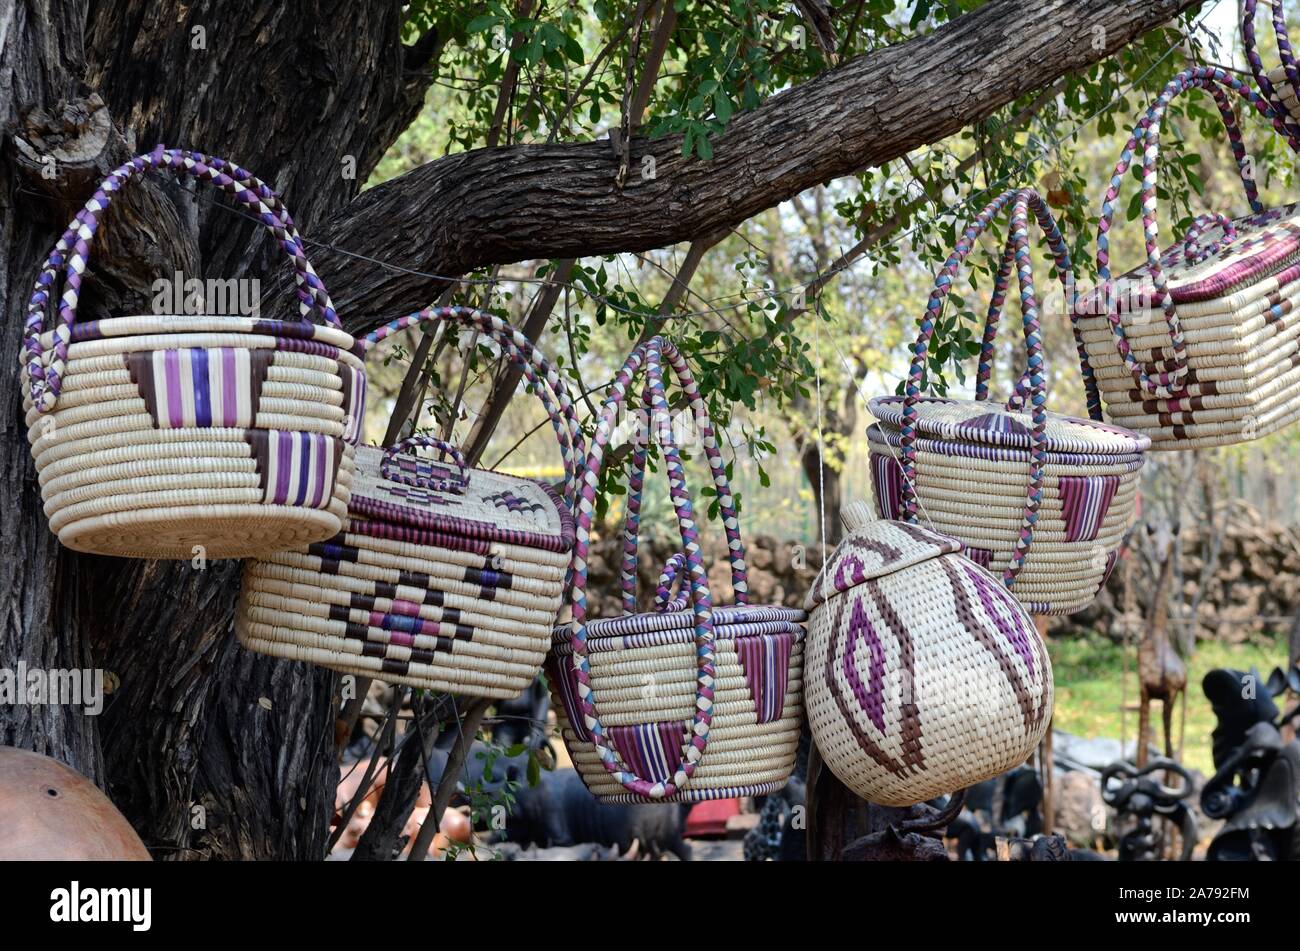 Traditional African Botswanan  woven bowls and baskets for sale at a street market Botswana Africa Stock Photo